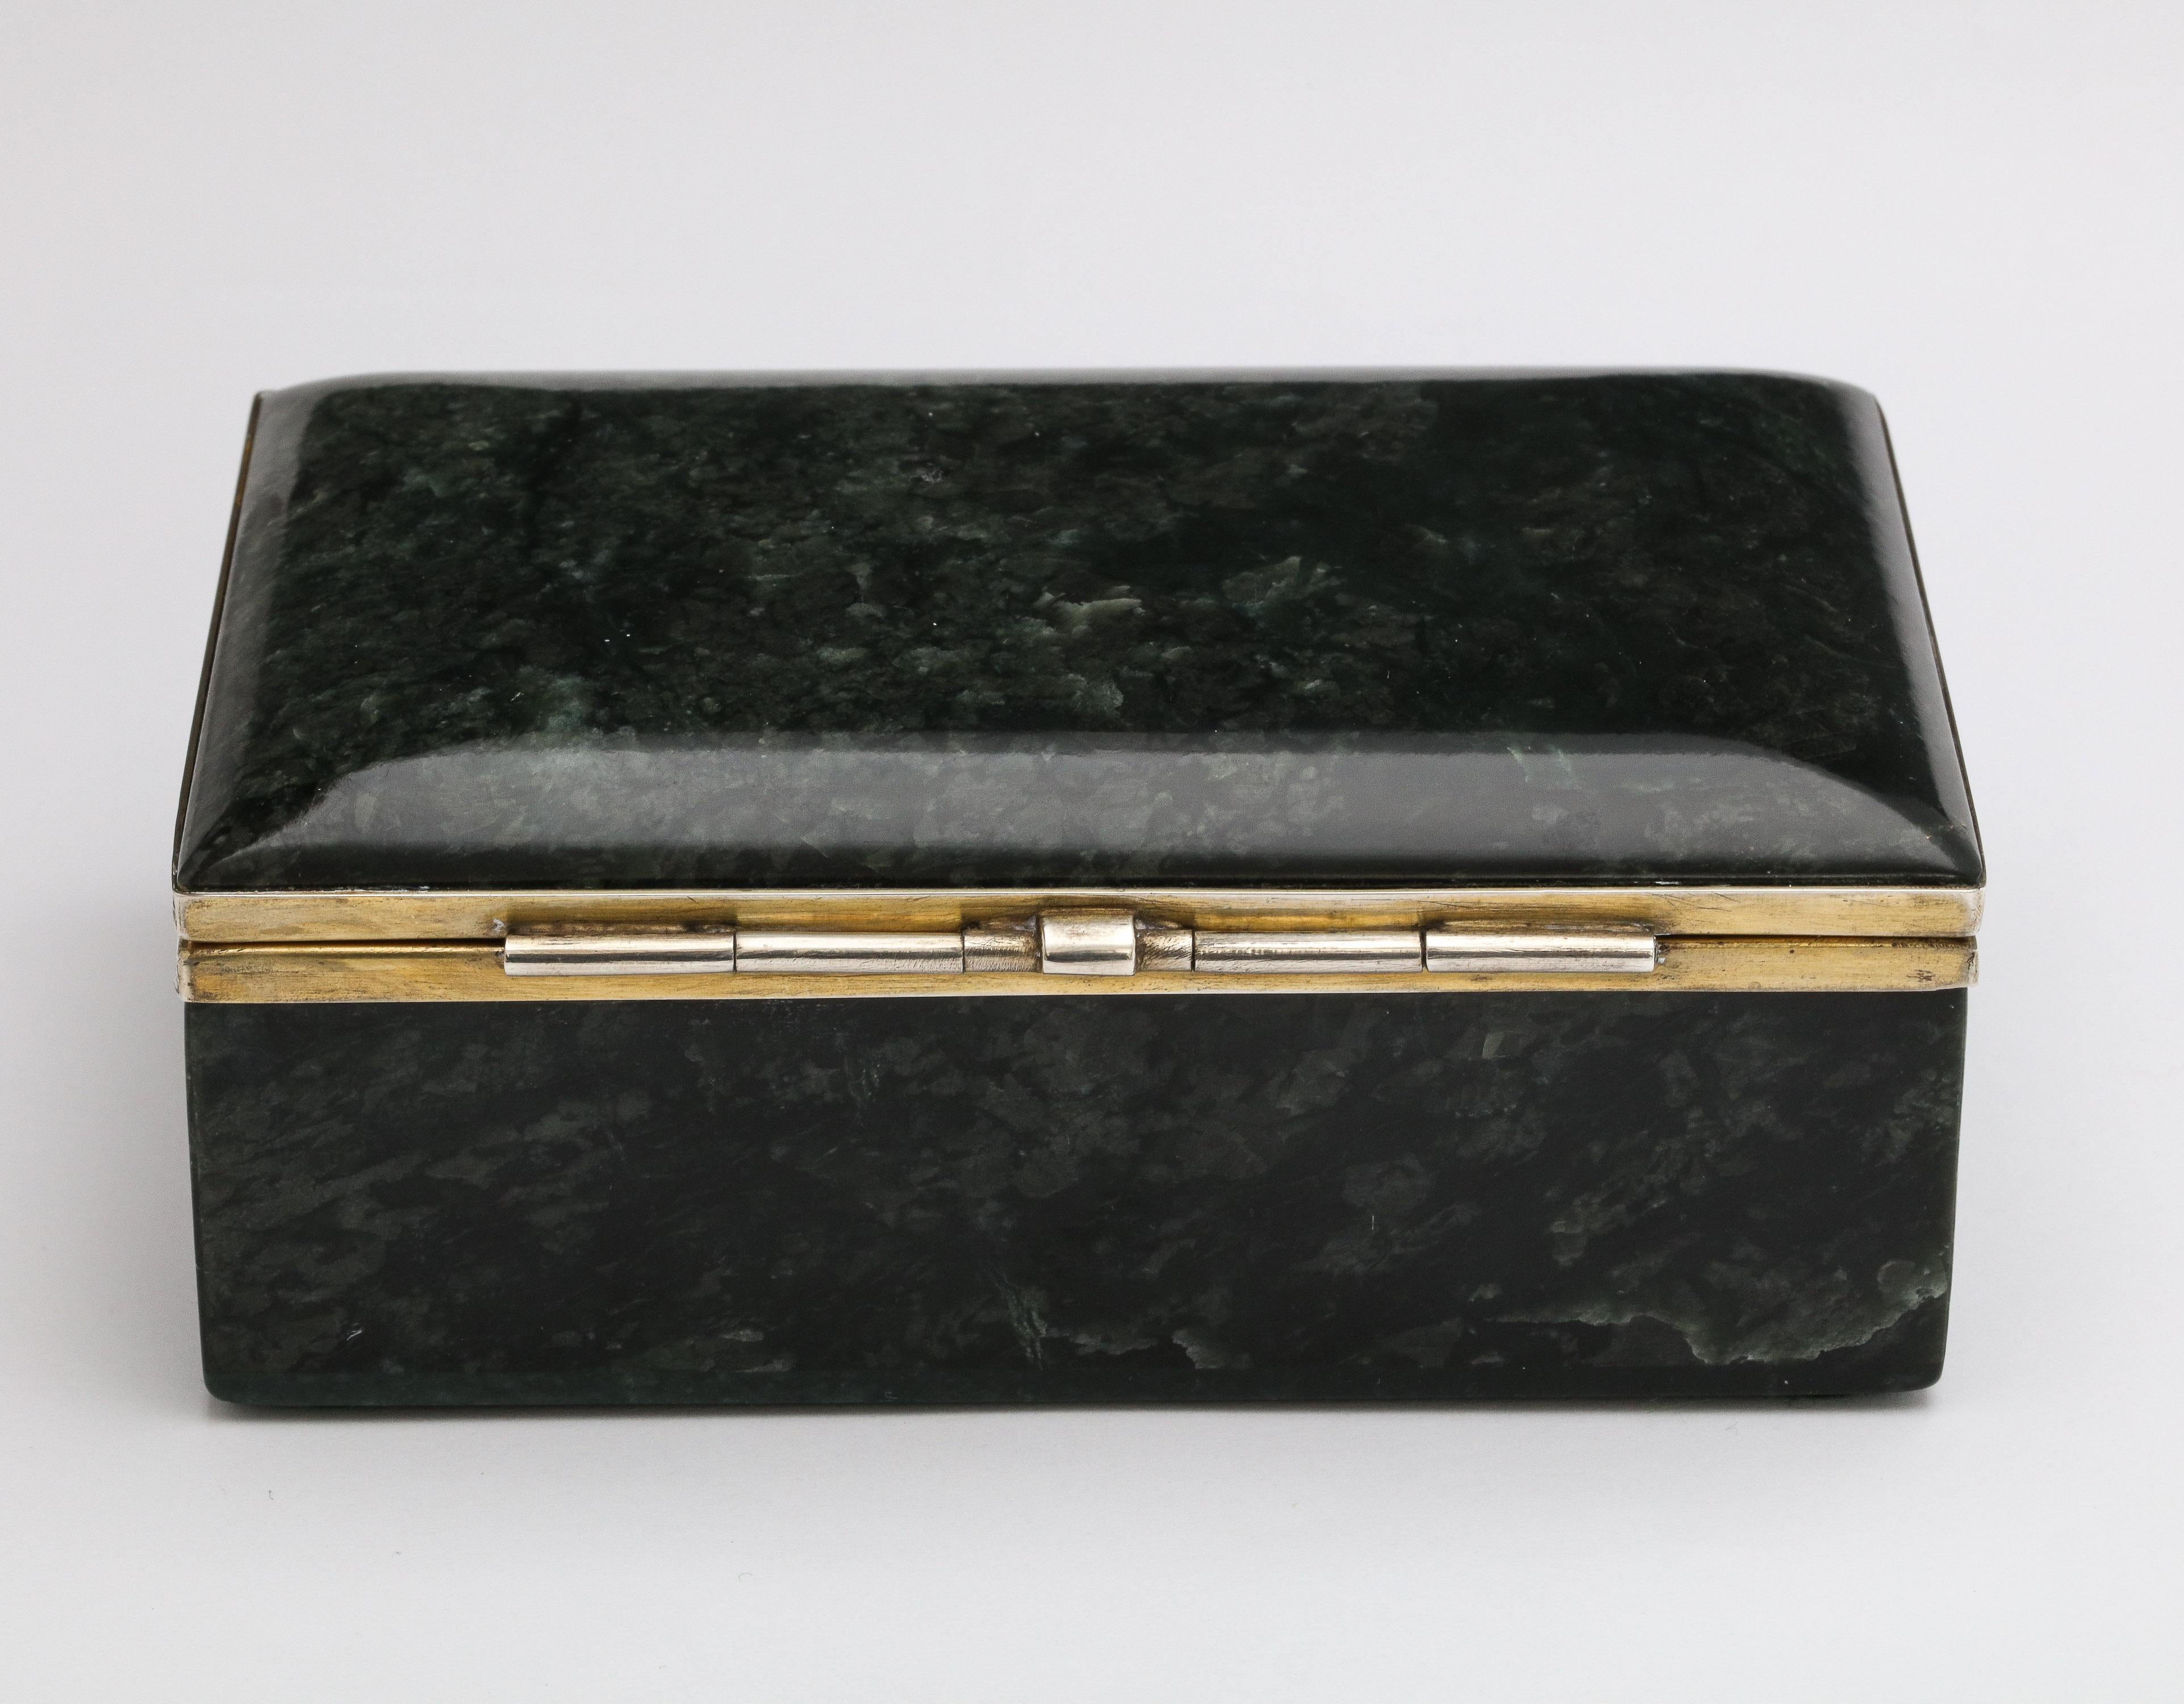 Early 20th Century Art Deco Sterling Silver-Mounted Green Nephrite Jade Table Box with Hinged Lid